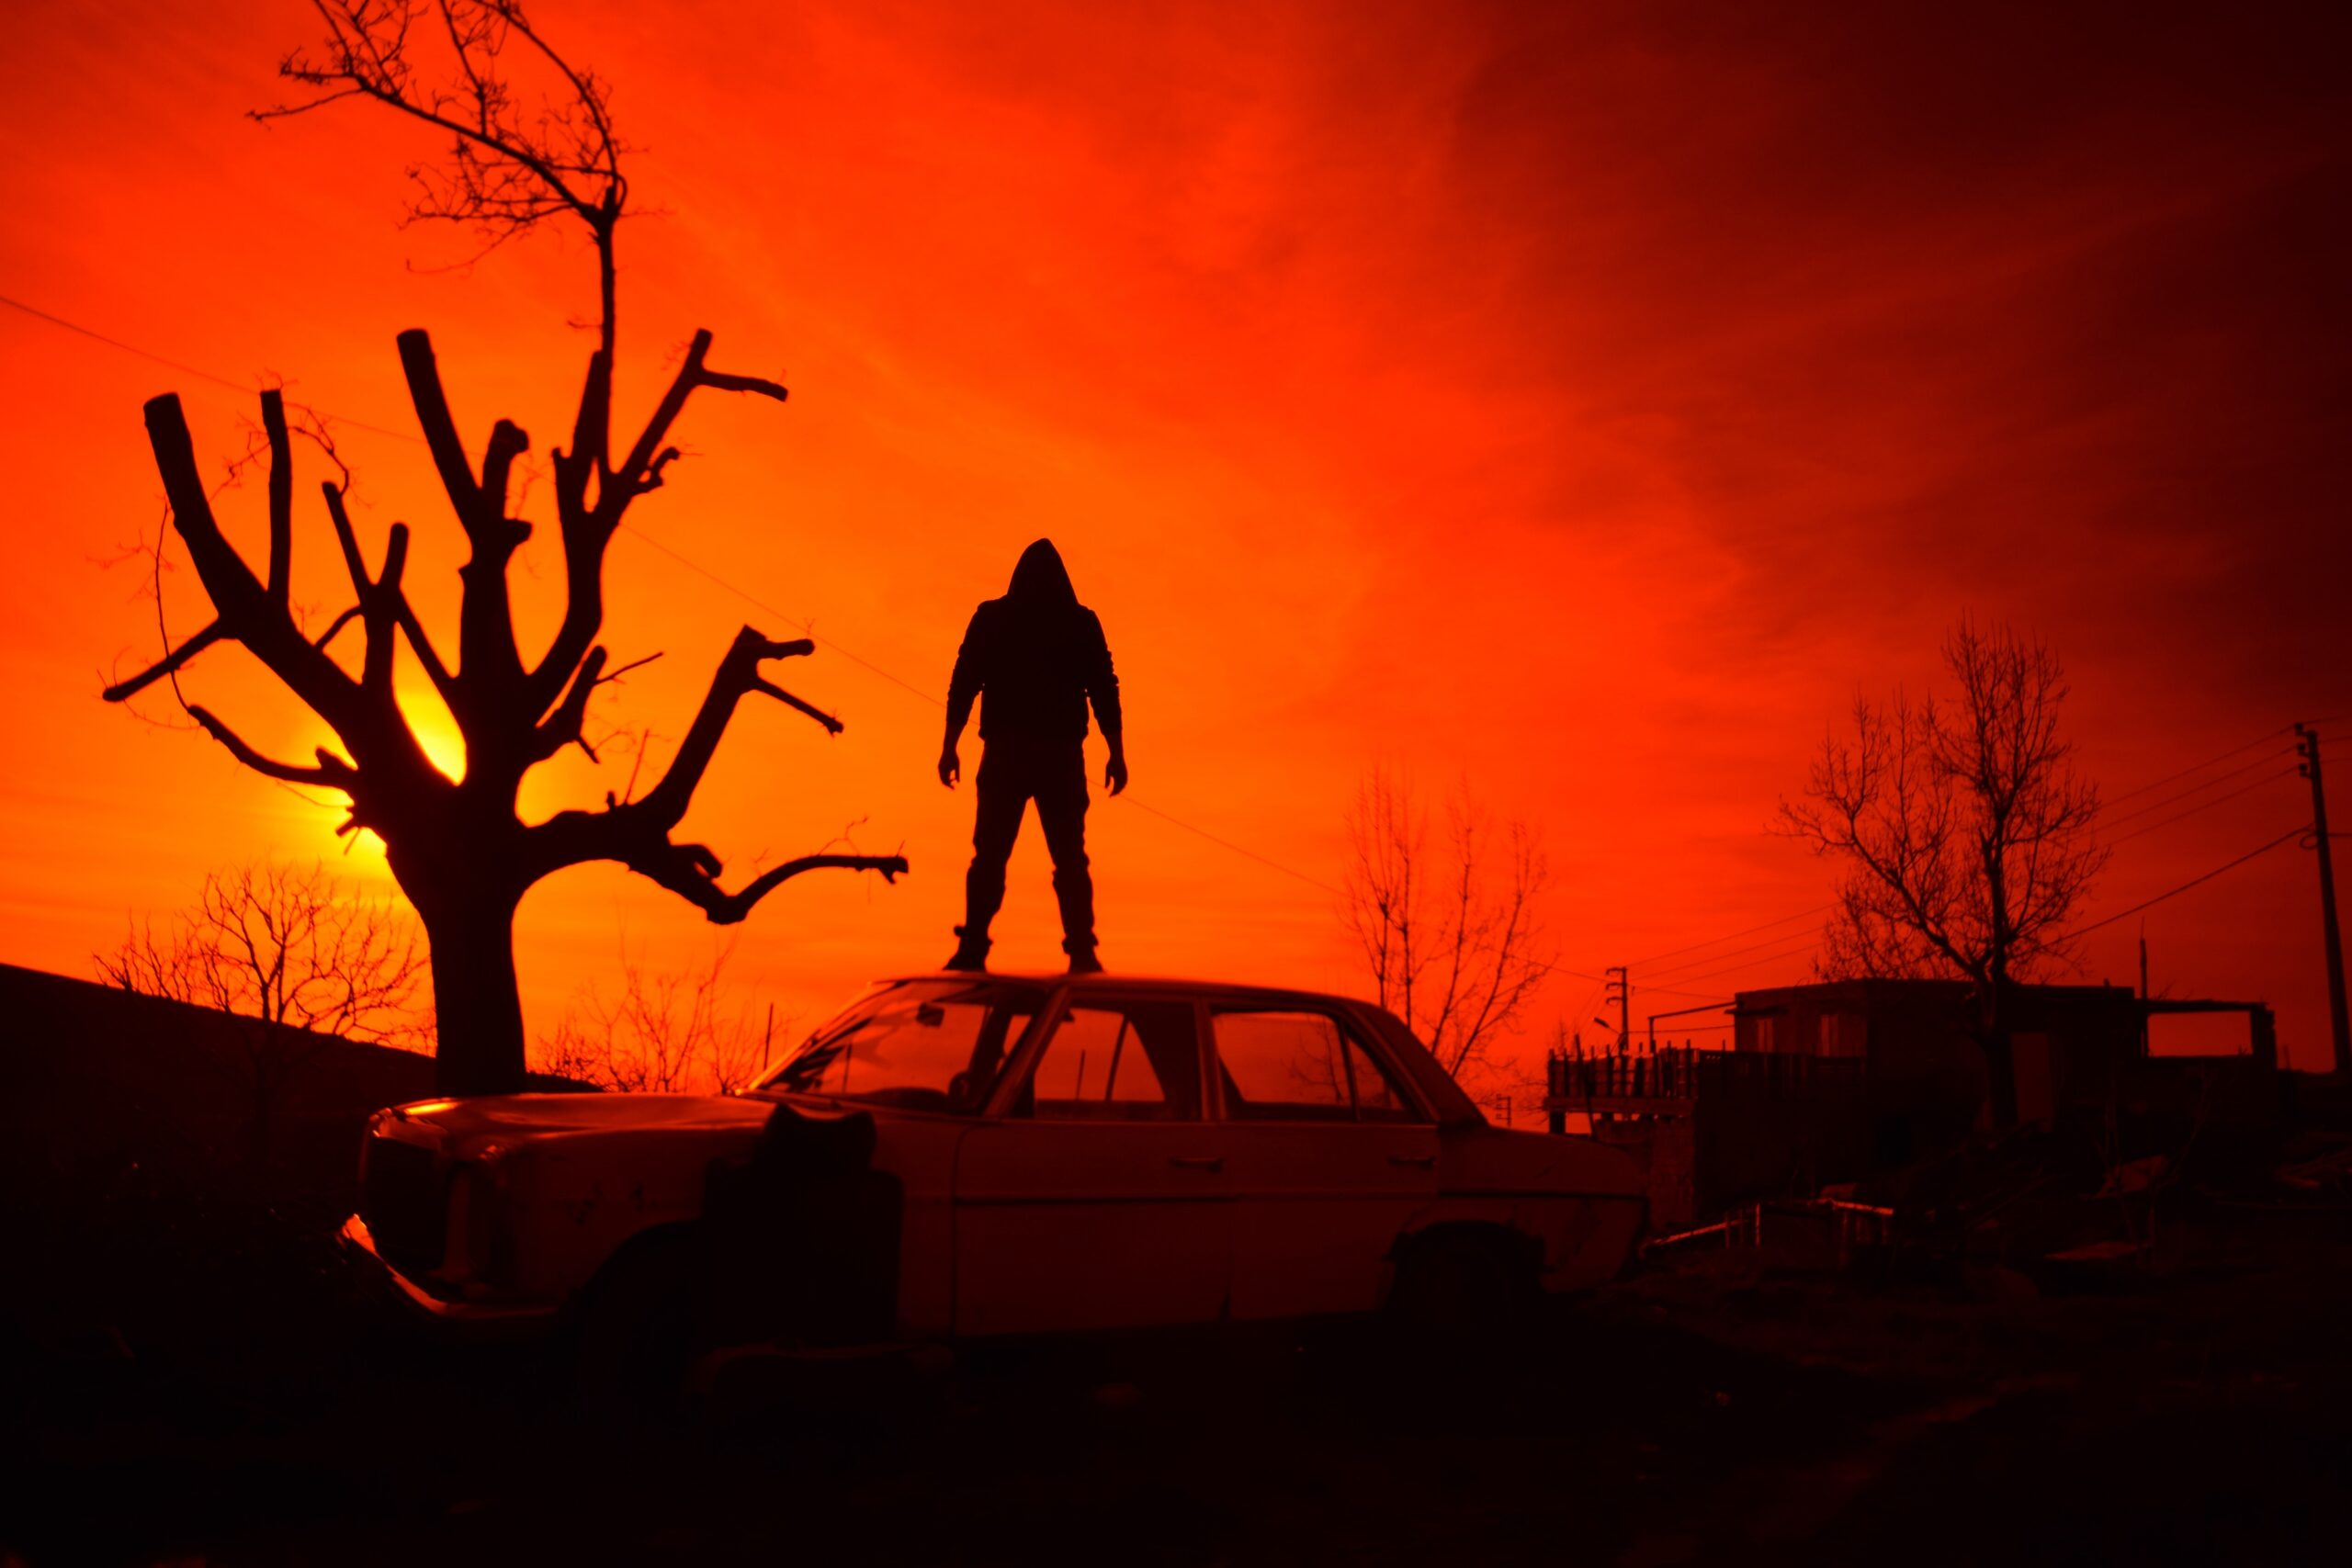 Person standing on car in apocalyptic dusk light